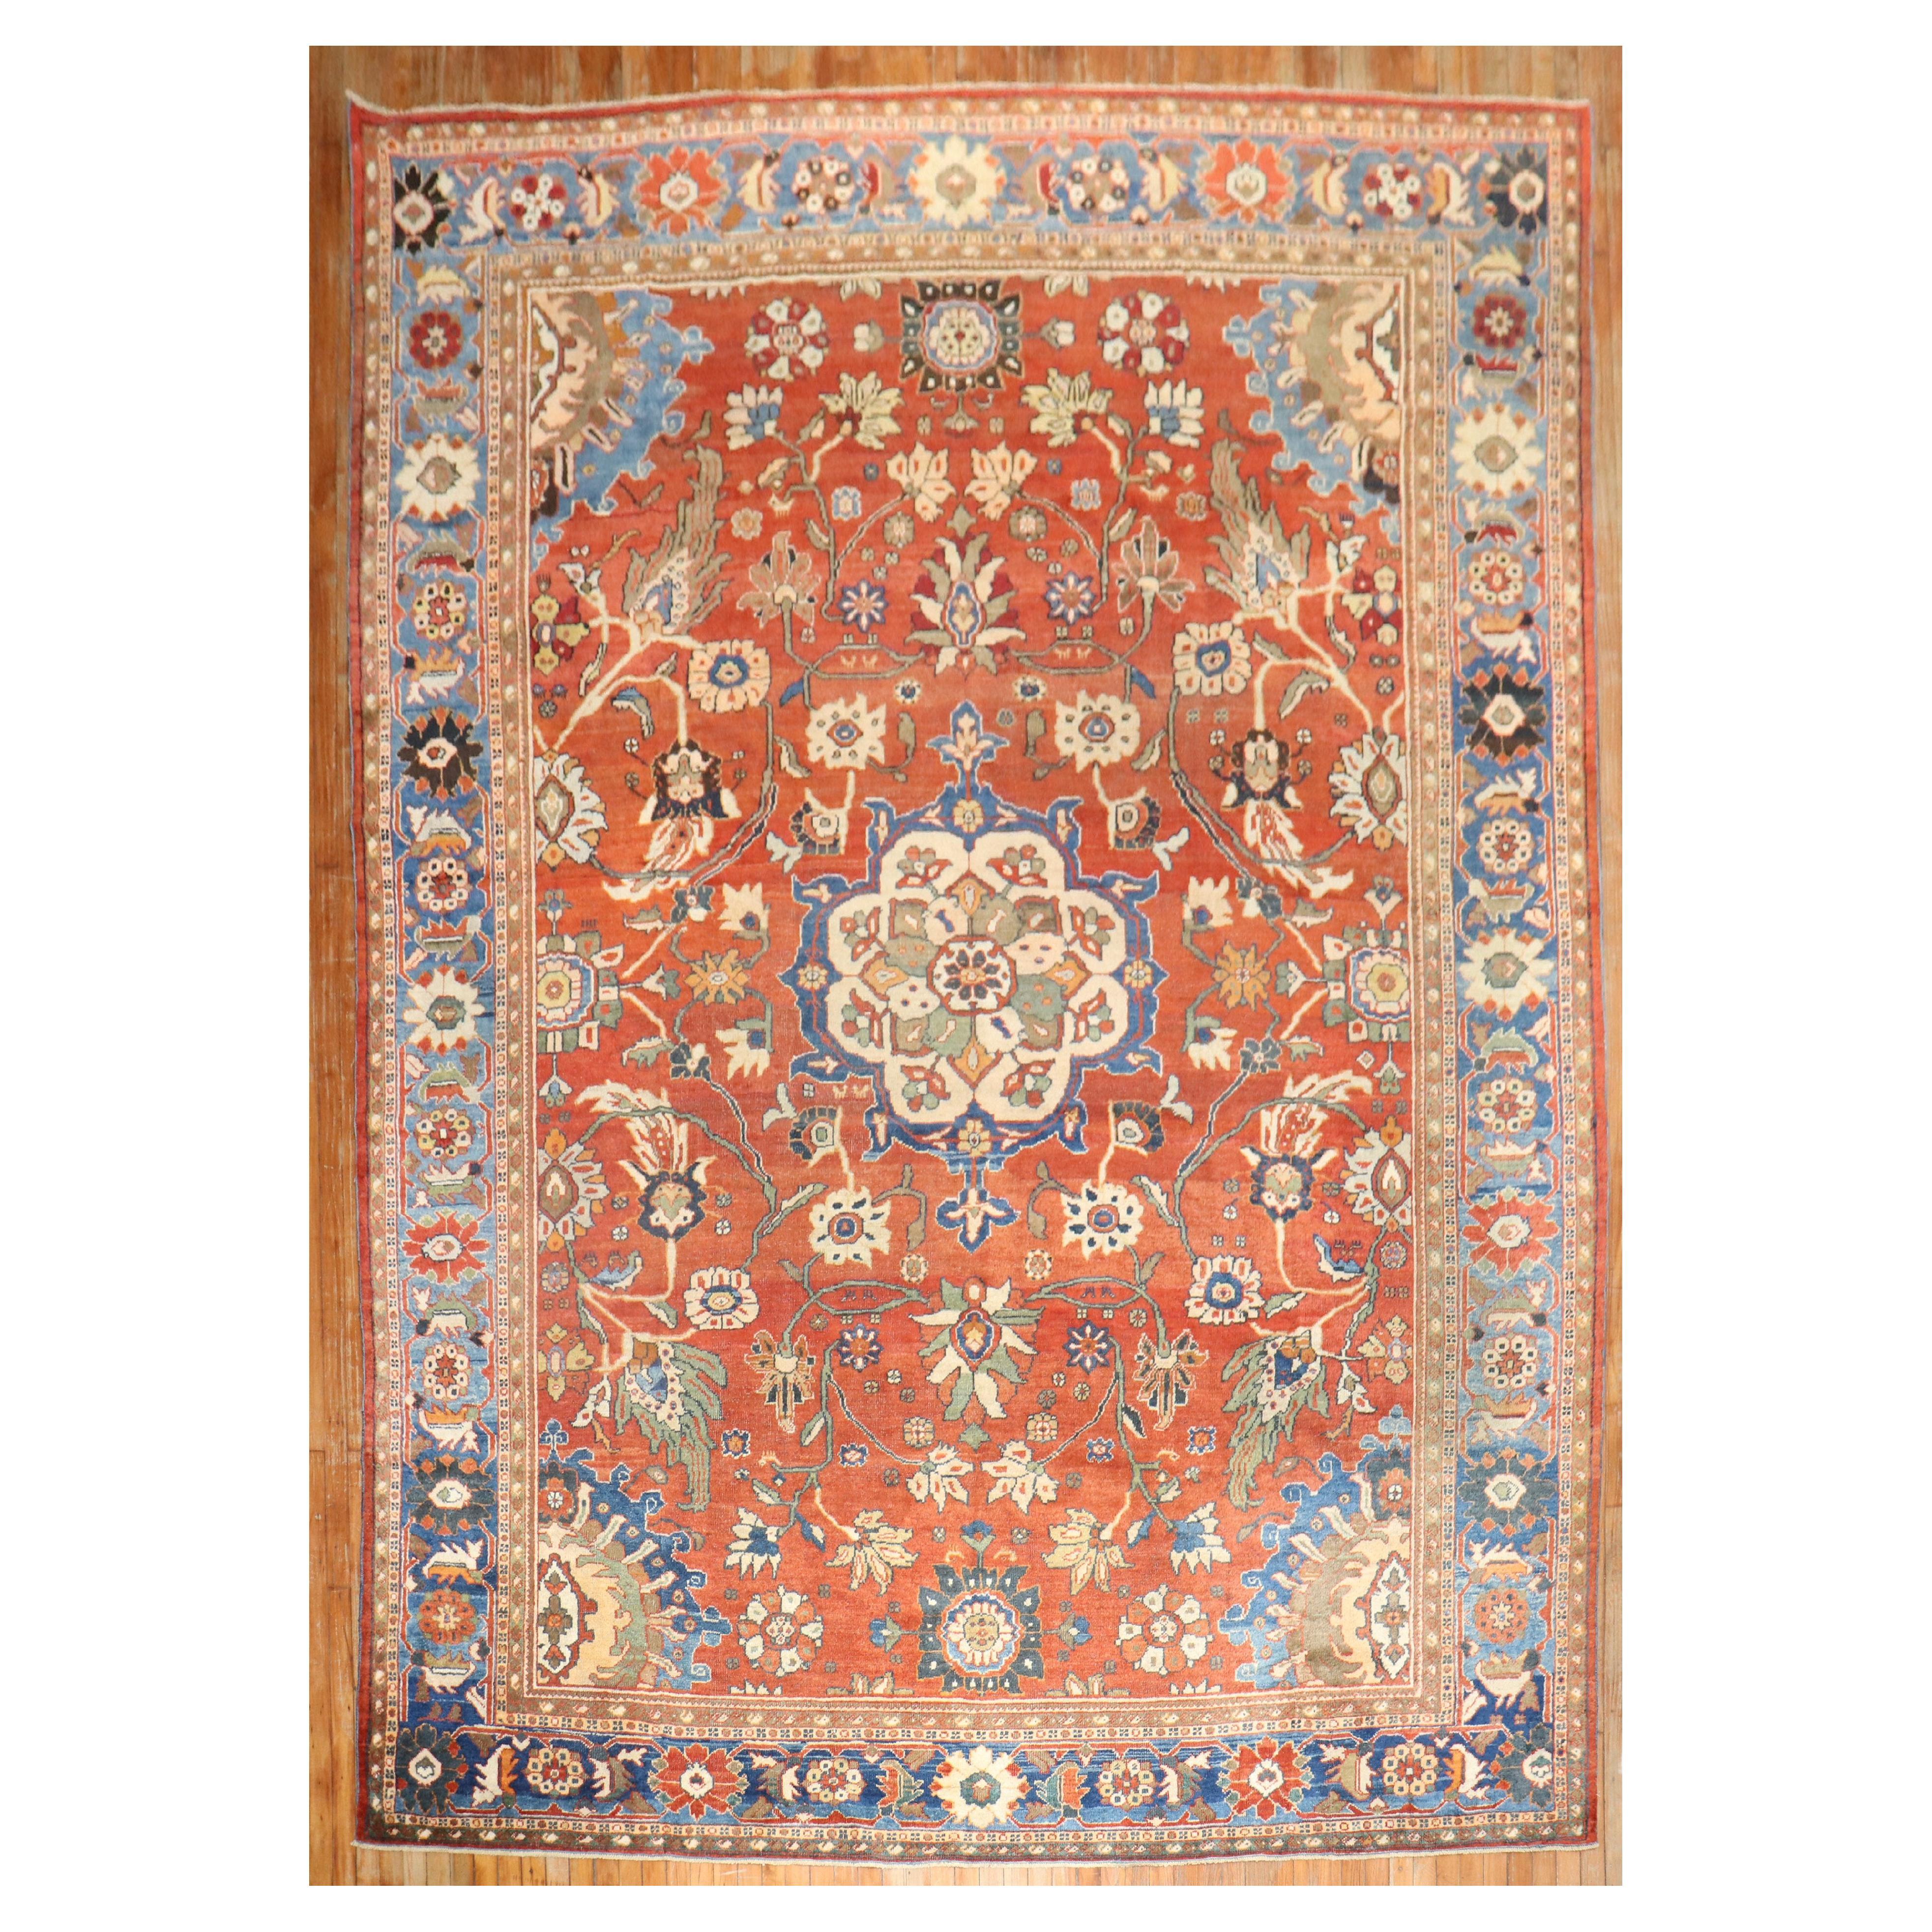 An antique Persian Mahal Sultanabad room-size square decorative rug from the 1st quarter of the 20th century

Measures: 9'9” x 13'.